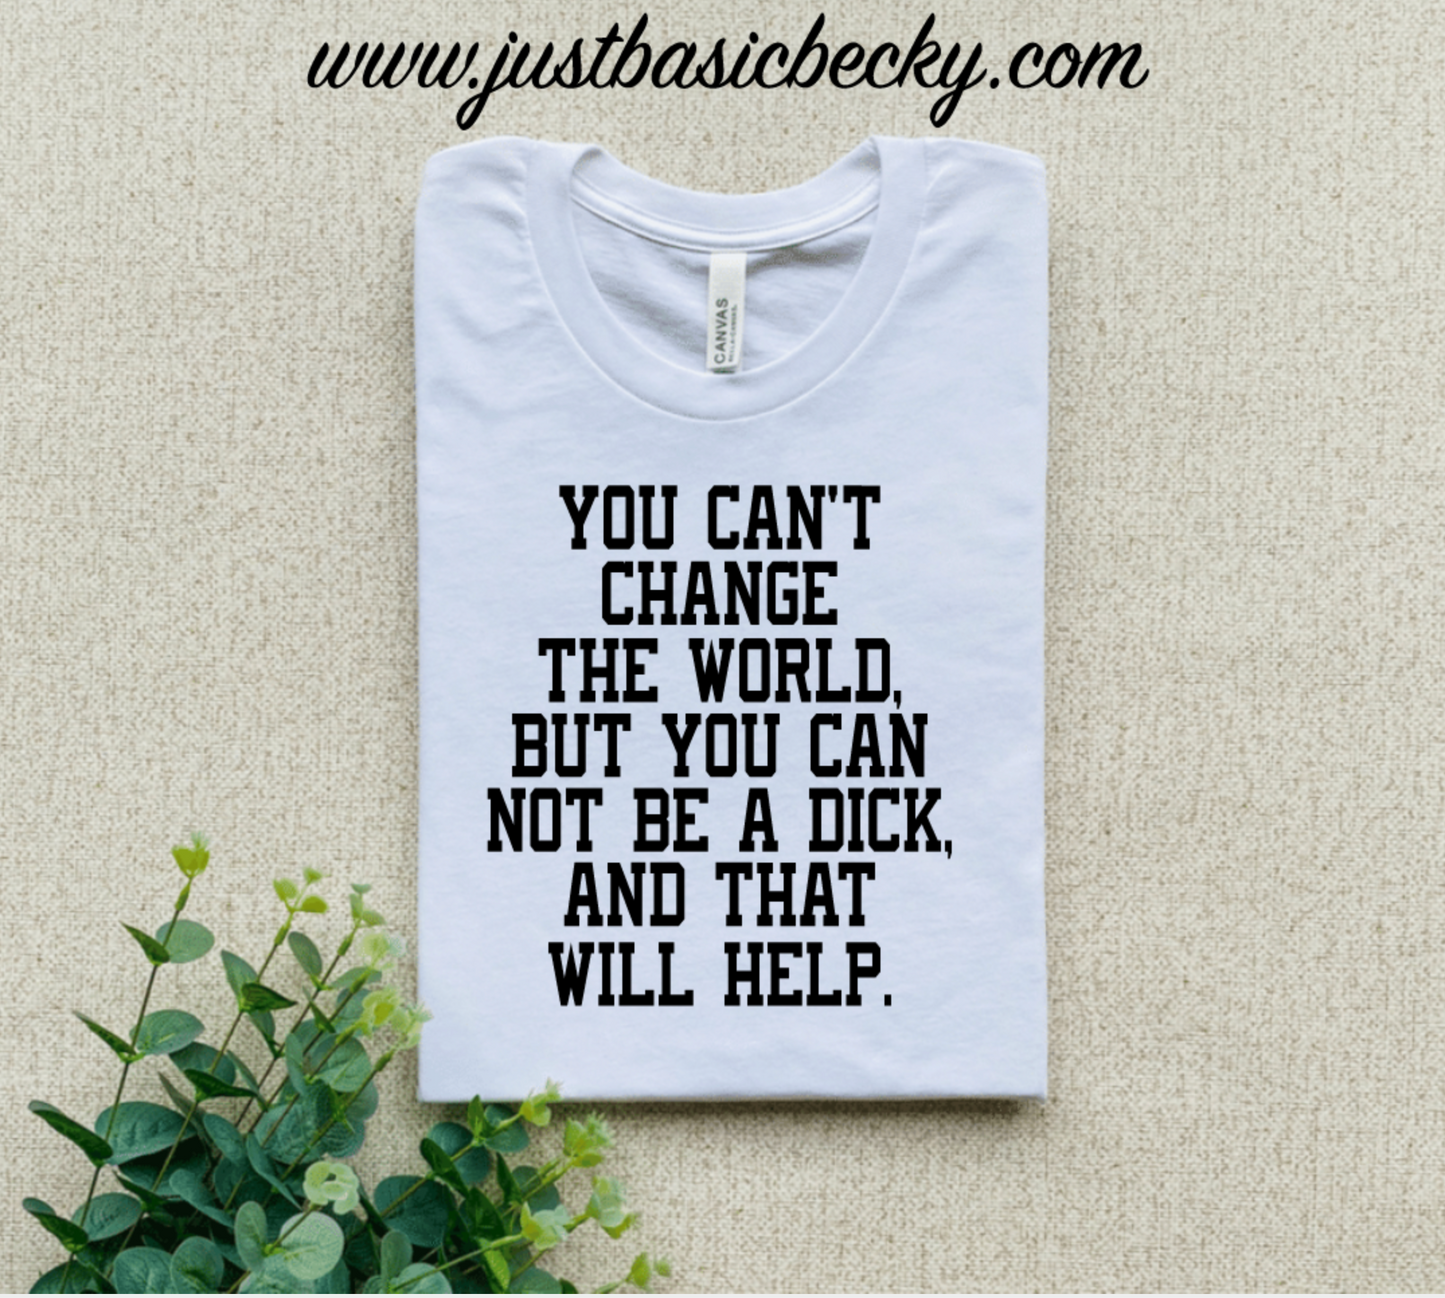 YOU CAN'T CHANGE THE WORLD, BUT YOU CAN NOT BE A DICK, AND THAT WILL HELP.